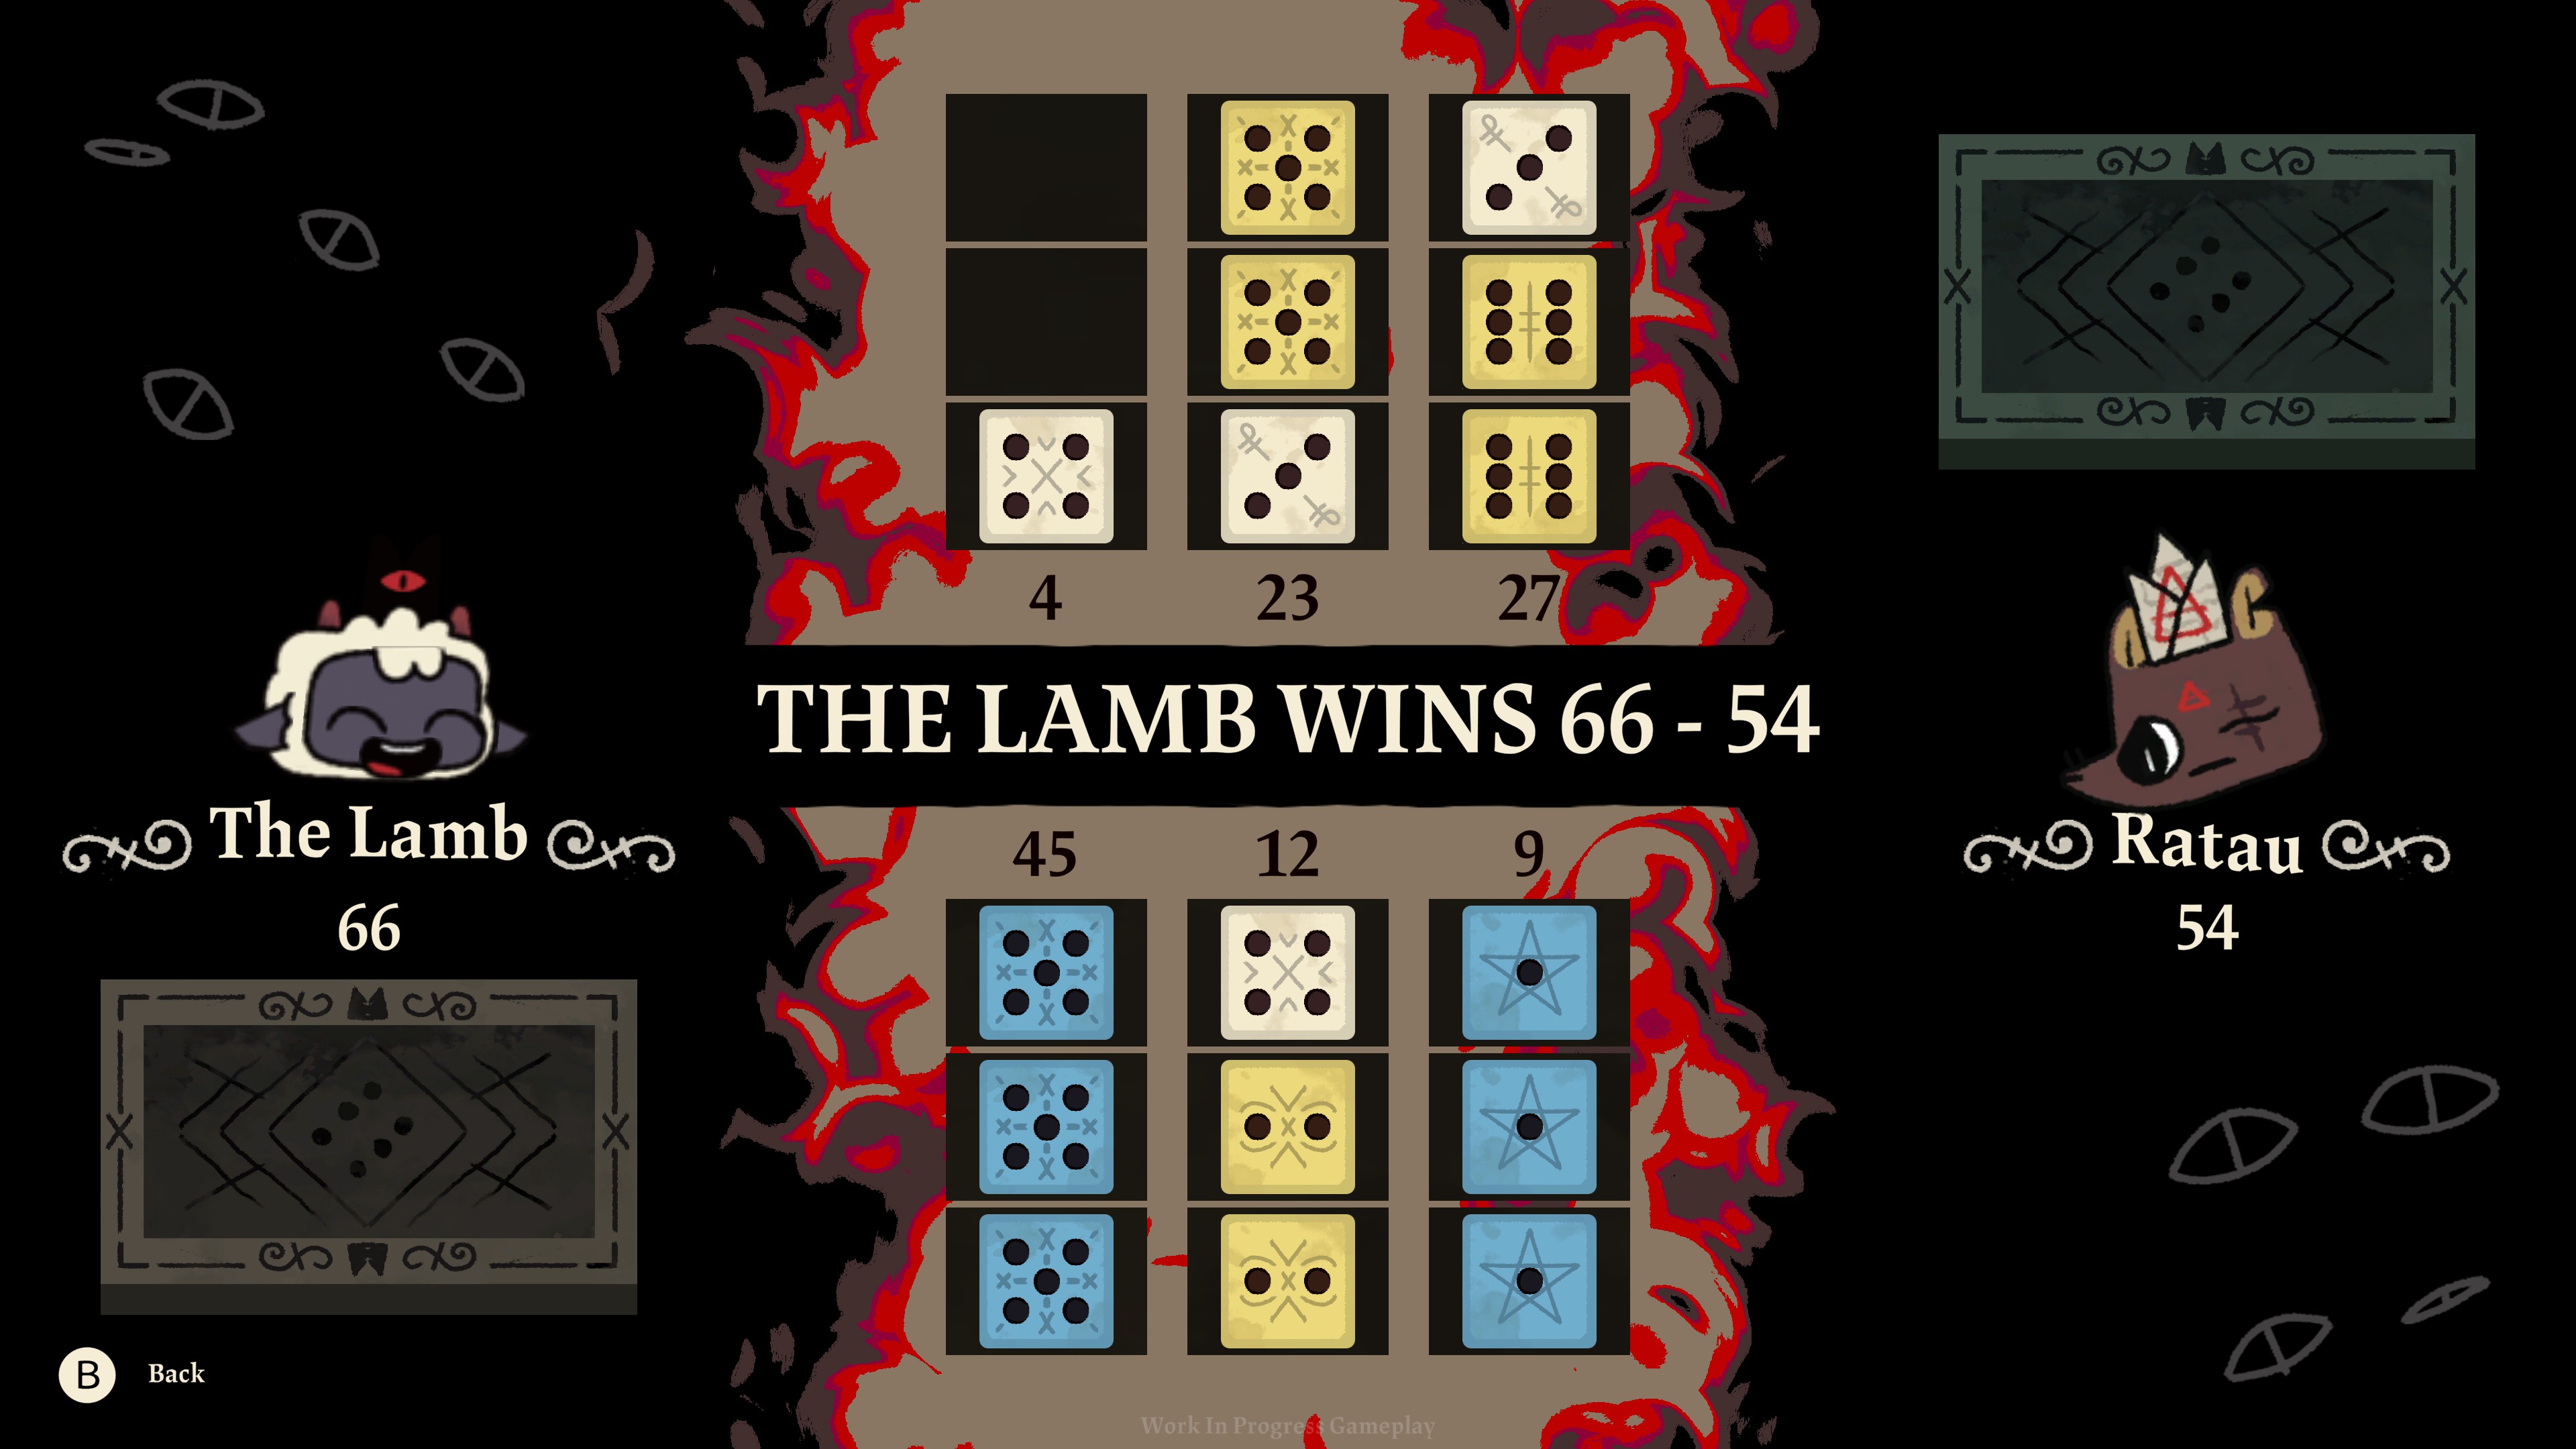 Cult of the Lamb review: Animal Crossing meets Dante's Inferno - Polygon